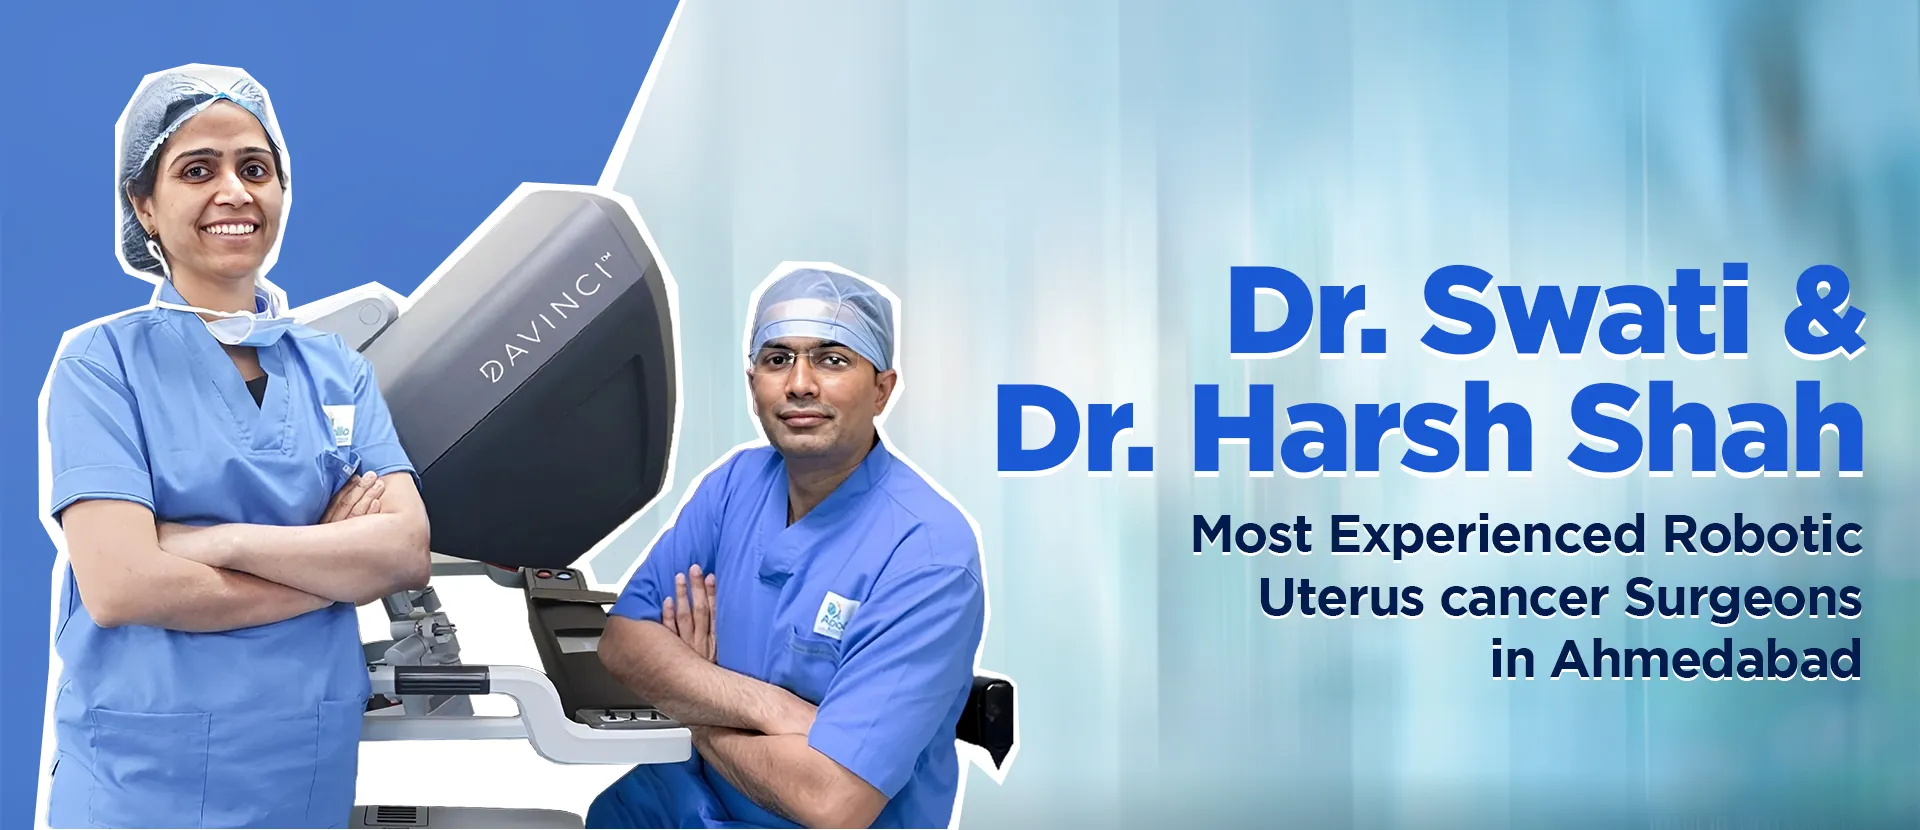 Best Uterus cancer Treatment with Robotic Surgery in Ahmedabad, Gujarat, India